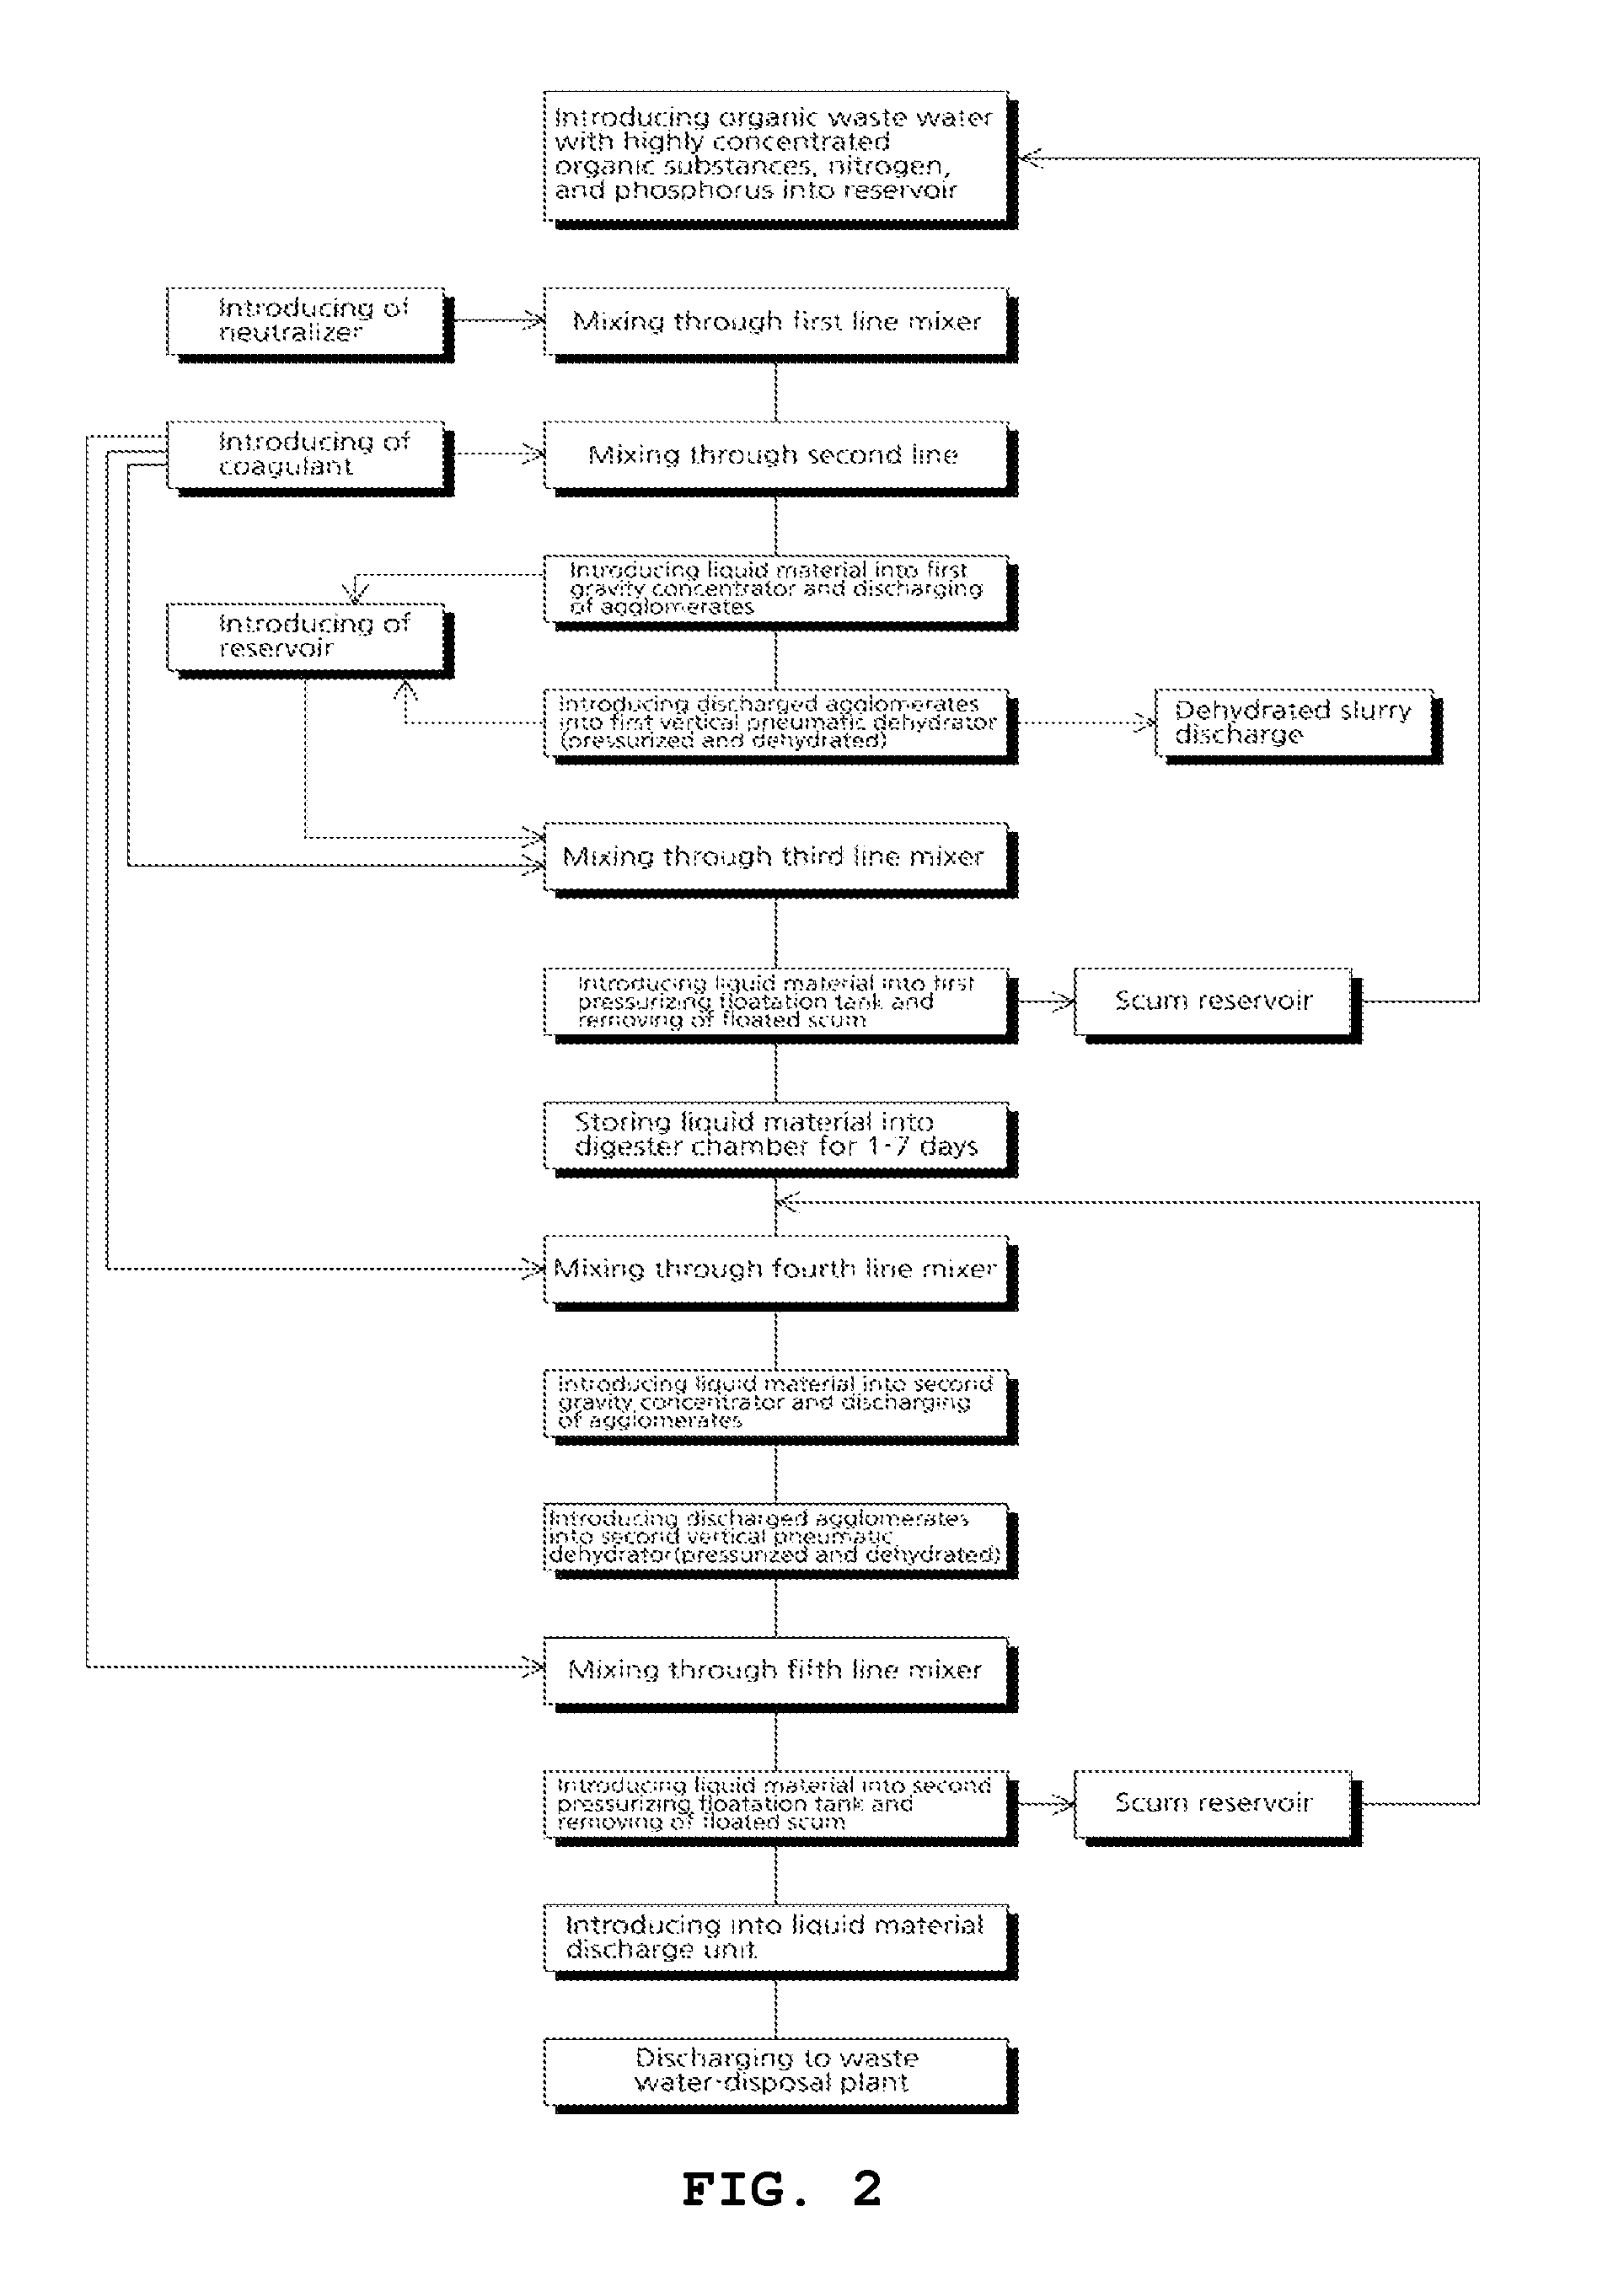 Method and apparatus for removing organic substances, nitrogen and phosphorus from highly concentrated organic waste water